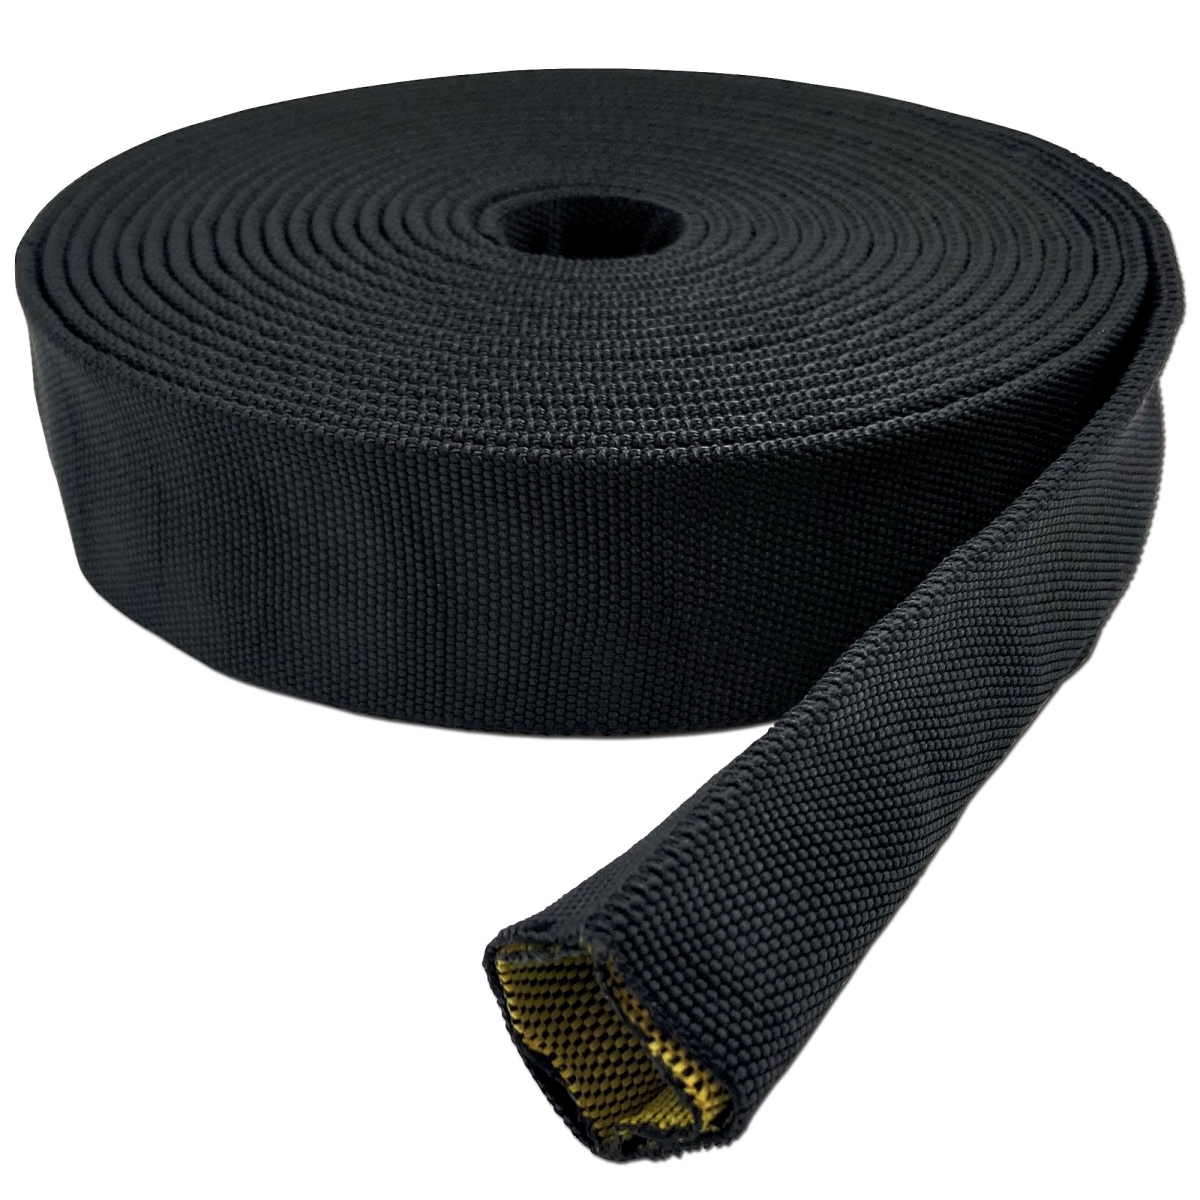 Picture of Electriduct BS-J-BURST-200-25-BK 2 in. x 25 ft. Burst Protection Multifilament Nylon Braided Sleeving - Black